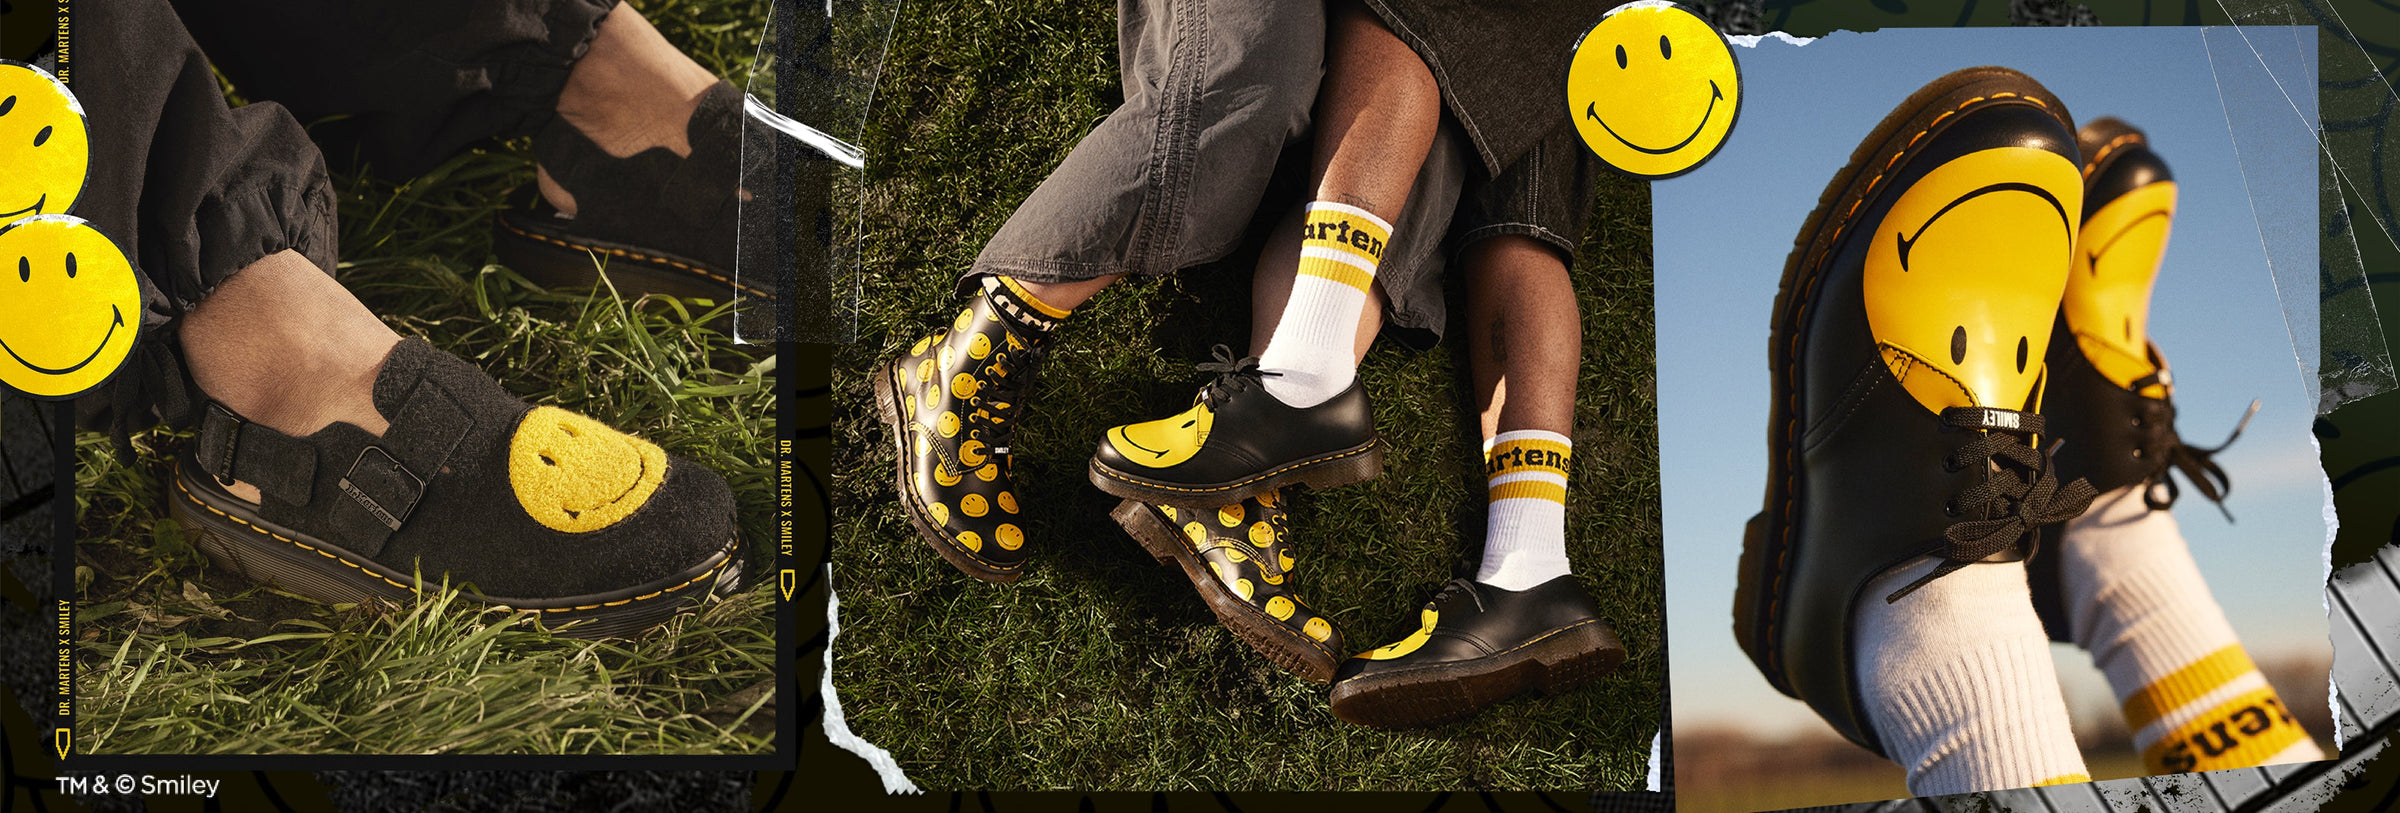 Dr-Martens-smiley-collaboration-launch